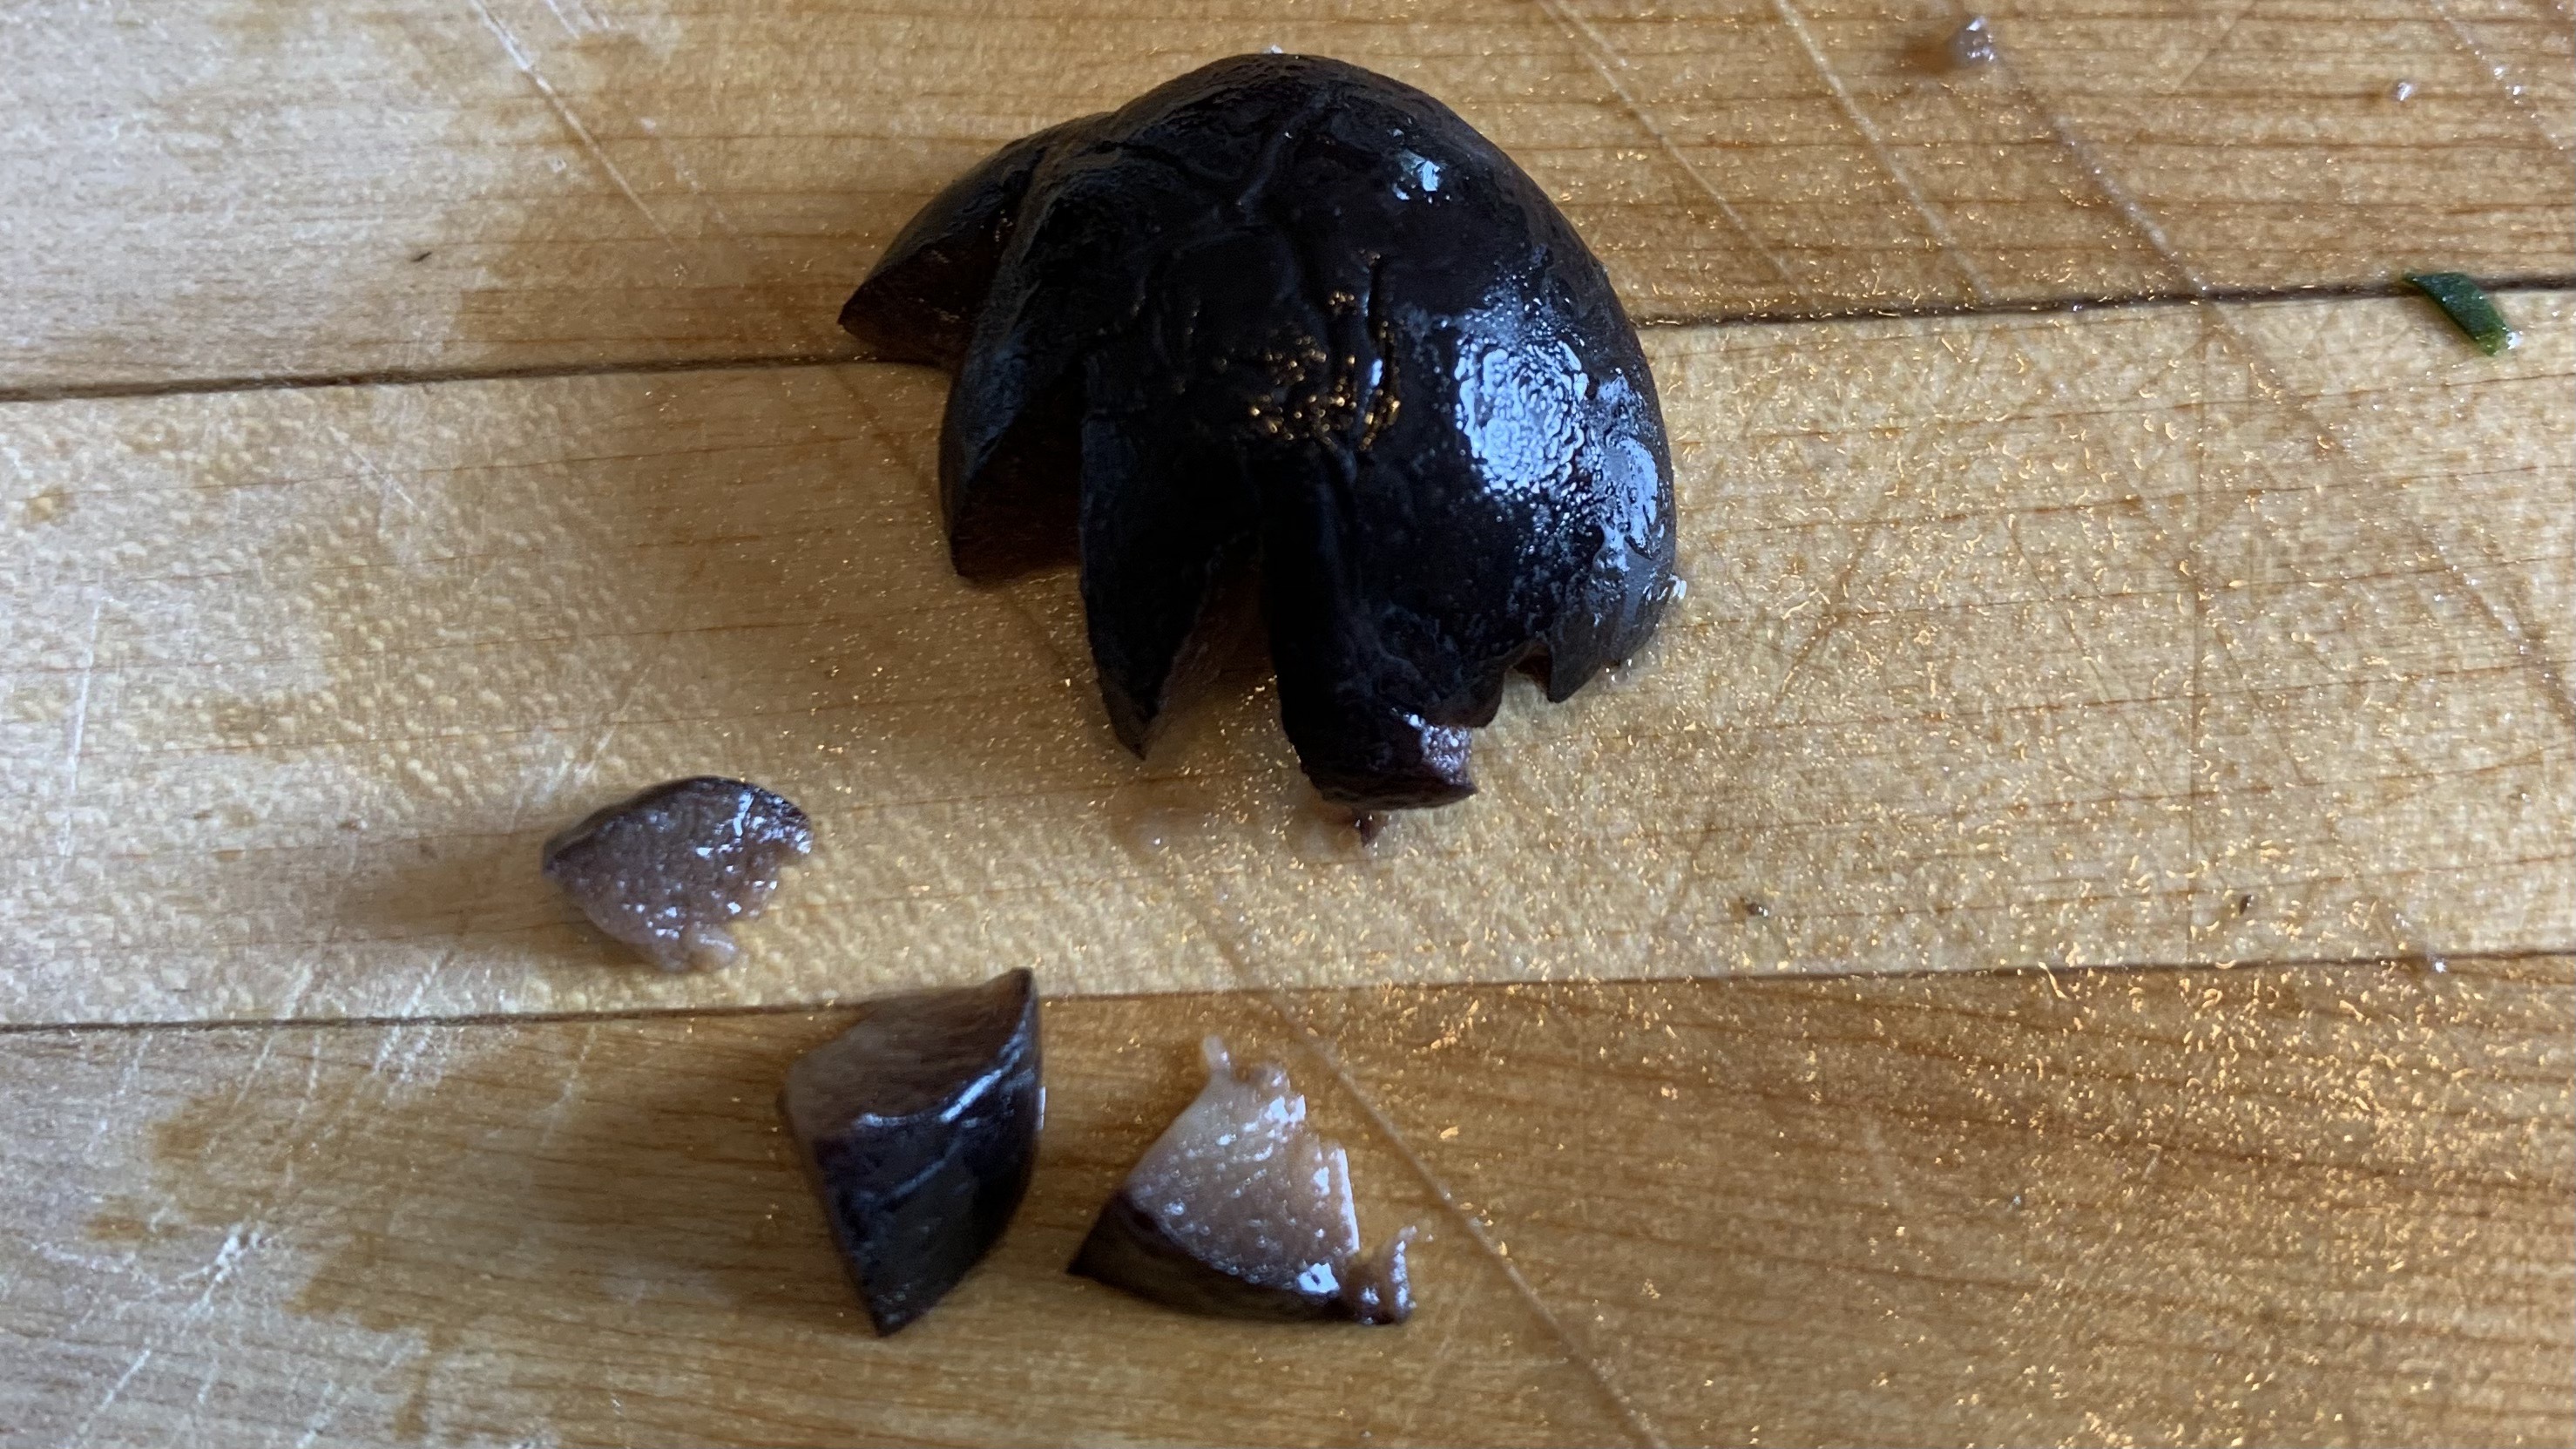 olive sliced into a bat wing